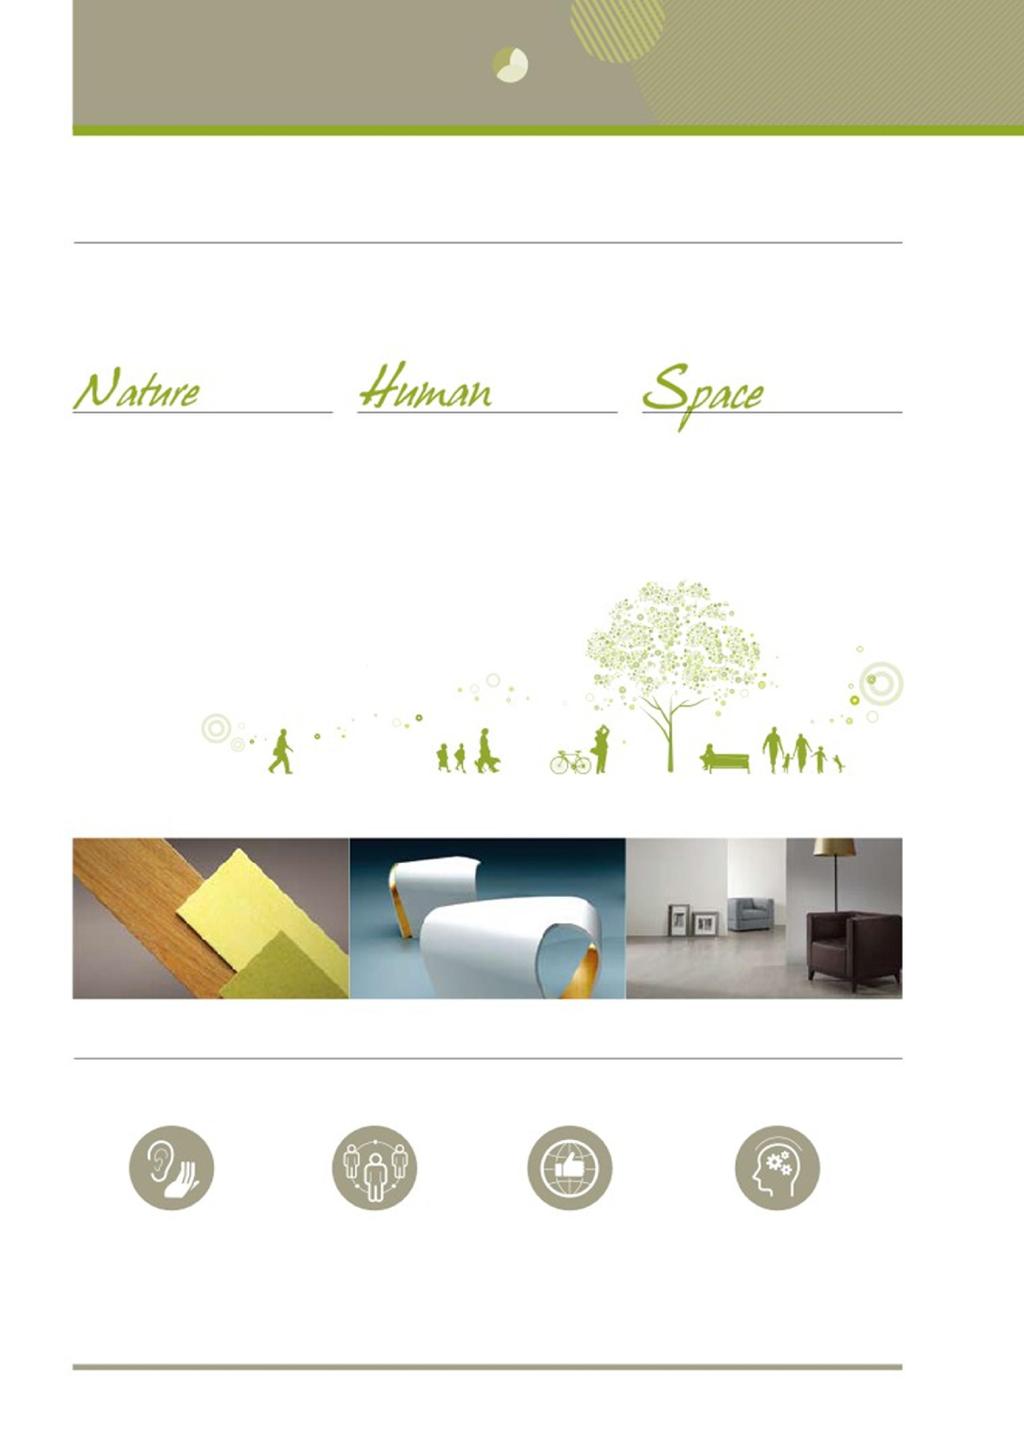 Company Profile Vision We create humanfriendly and ecoconscious living space 자연을닮은, 사람을담은행복한생활공간을만듭니다.